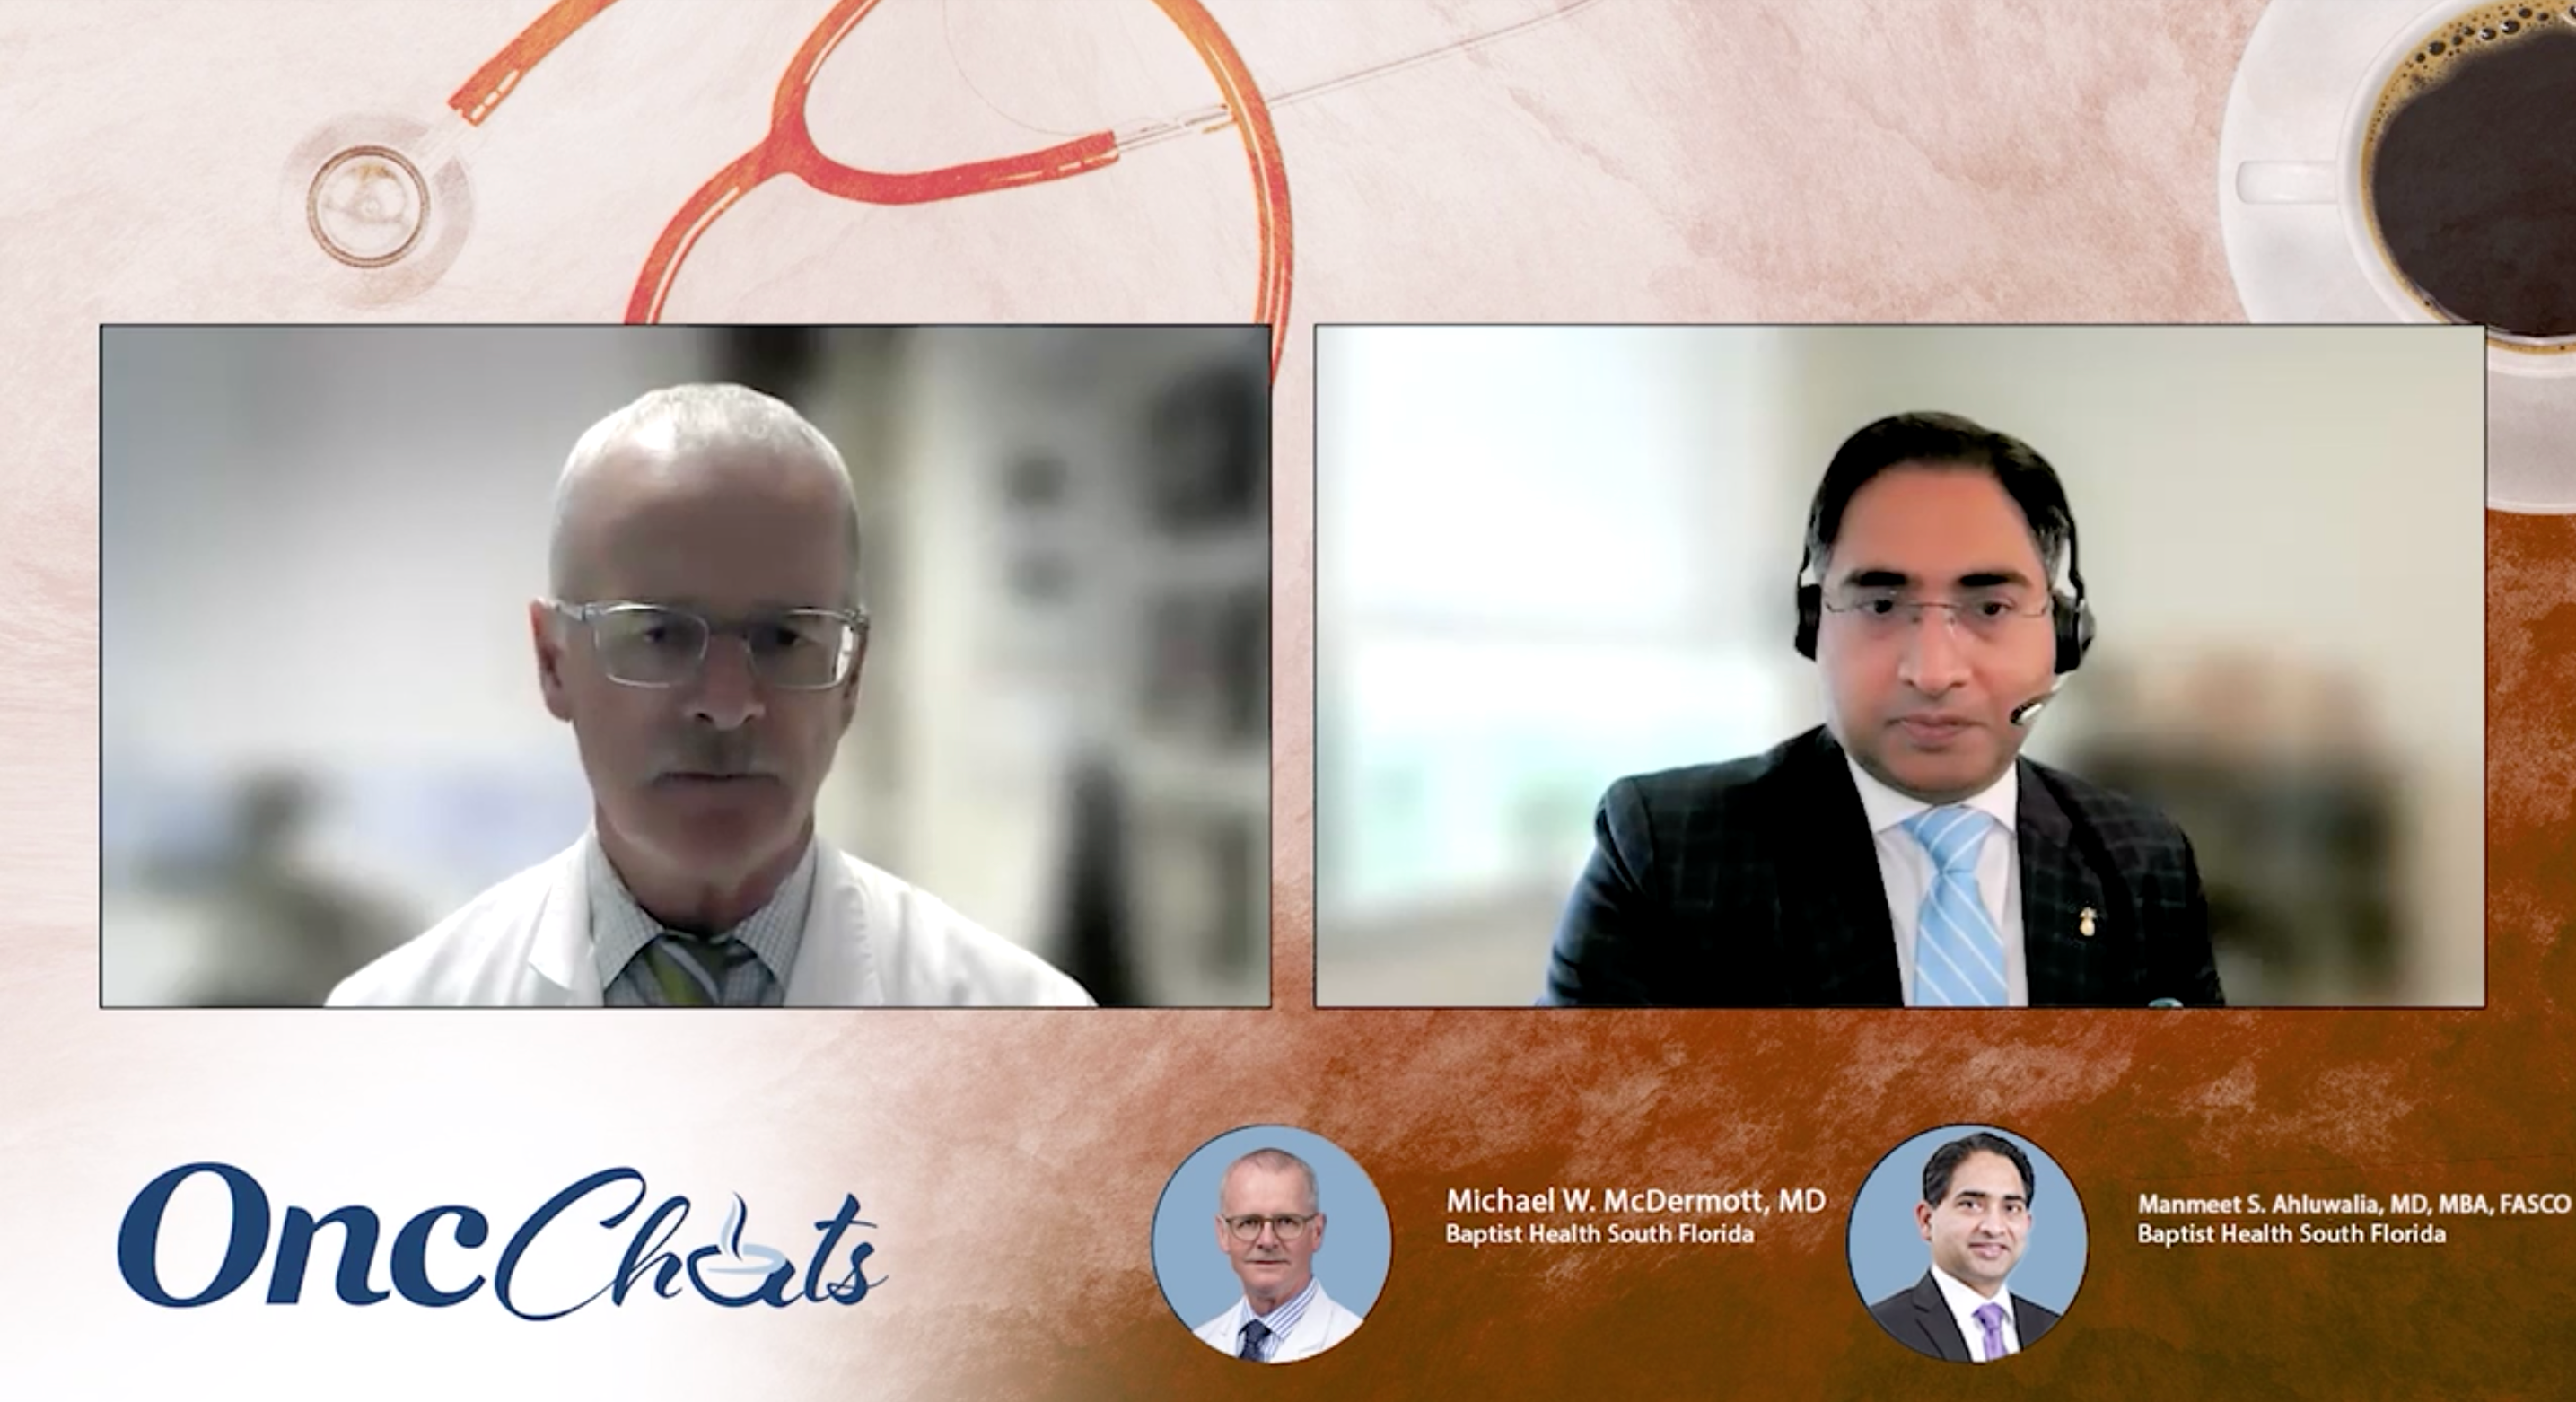 In this first episode of OncChats: Examining LIFU–Aided Liquid Biopsy in Glioblastoma, Manmeet Singh Ahluwalia, MD, and Michael W. McDermott, MD, explain how low-intensity focused ultrasound works and the rationale for examining its use in cancer and other conditions.